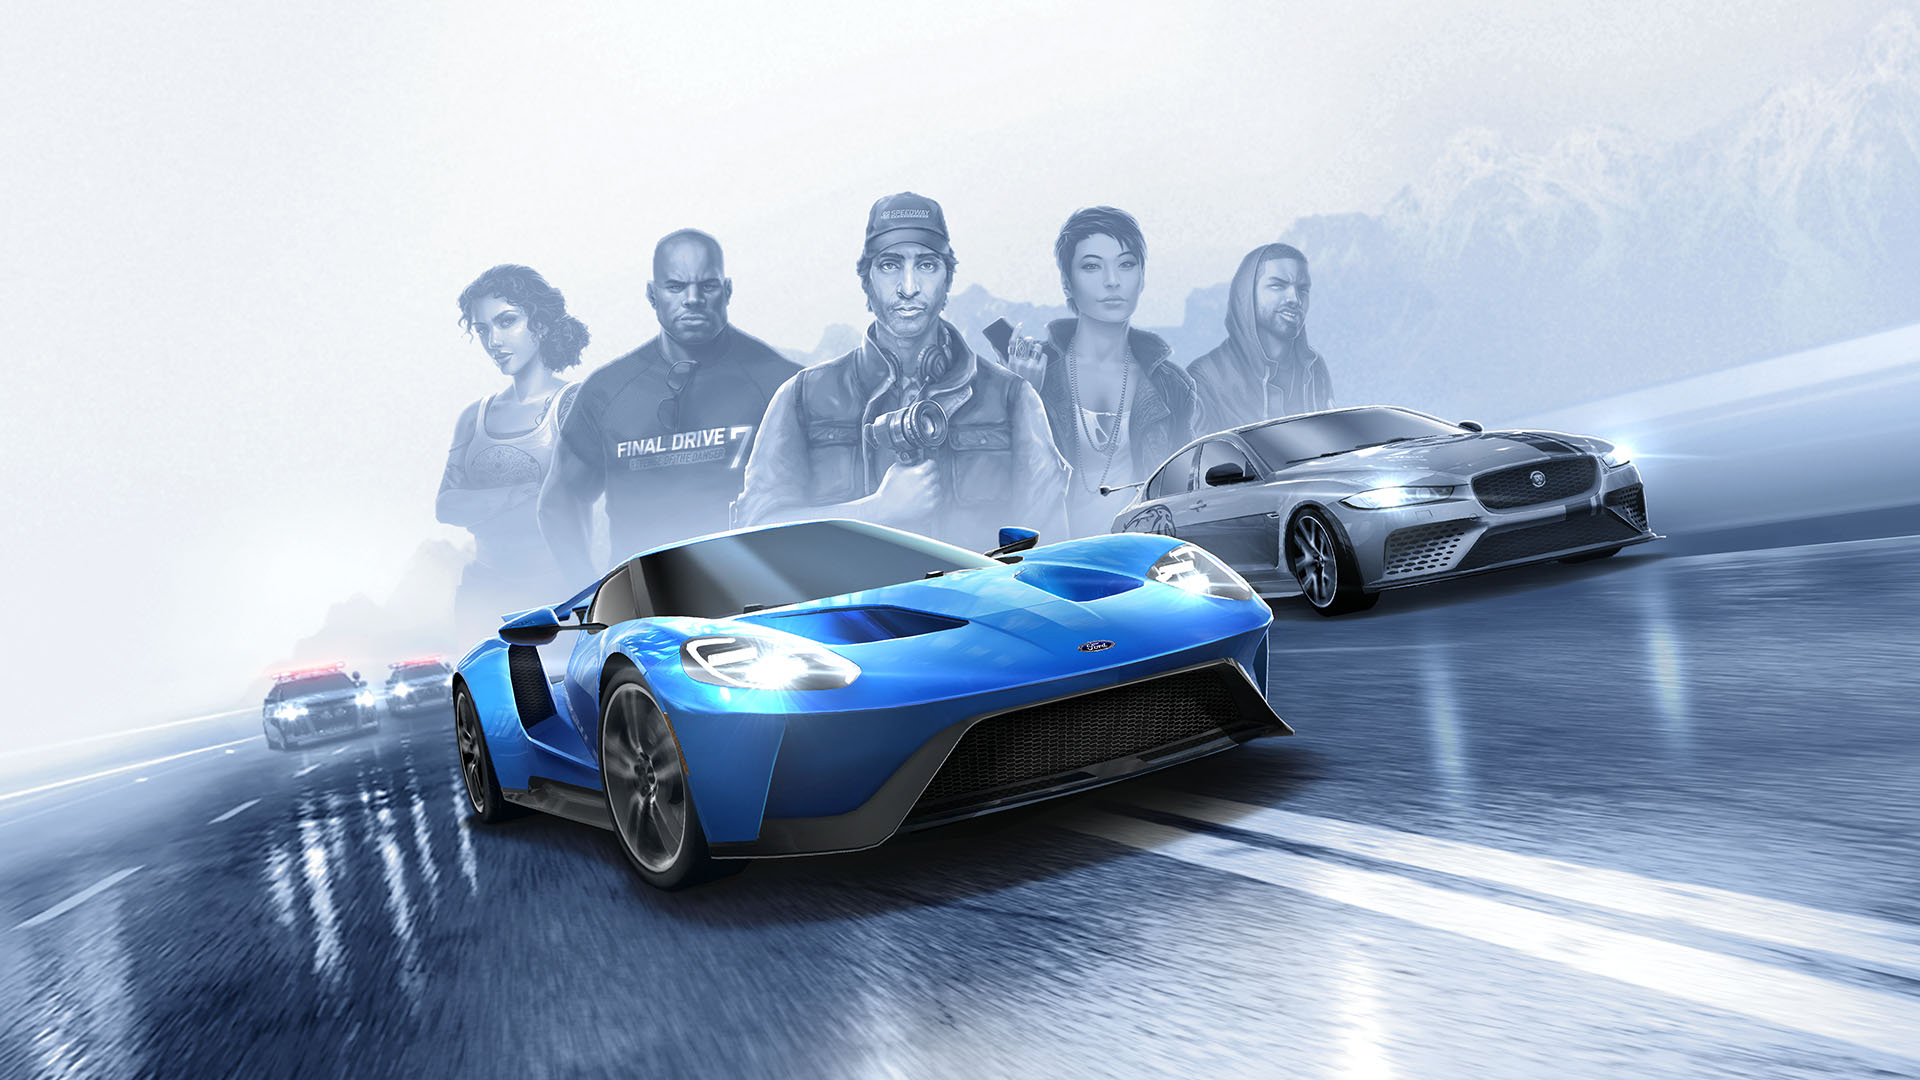 Wallpapers Need for Speed racing cars on the desktop